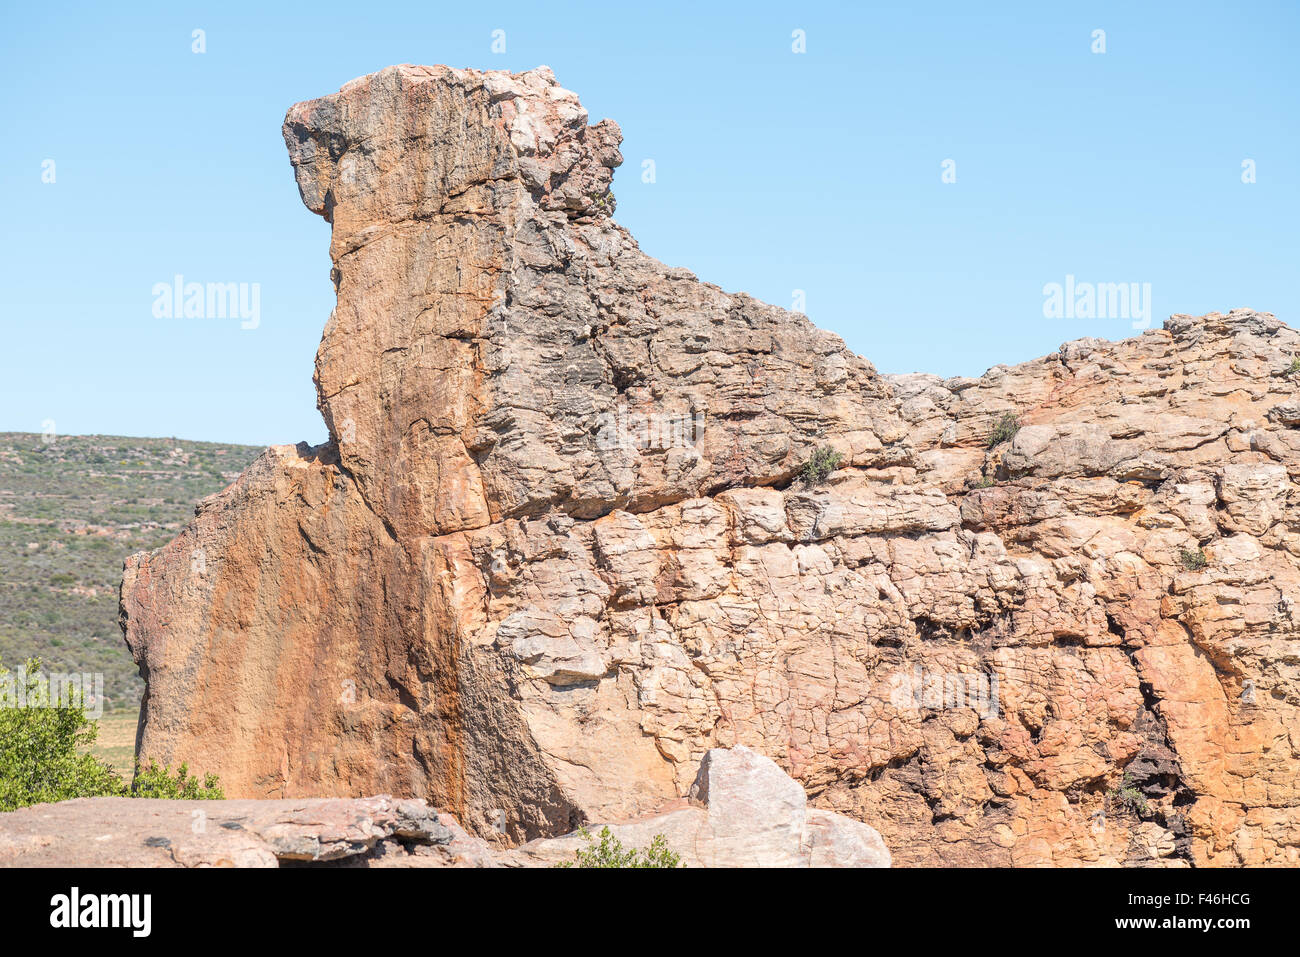 Sandstone formation at the Gifberg (Poison Mountain) Resort near Vanrhynsdorp in the Western Cape Province of South Africa Stock Photo